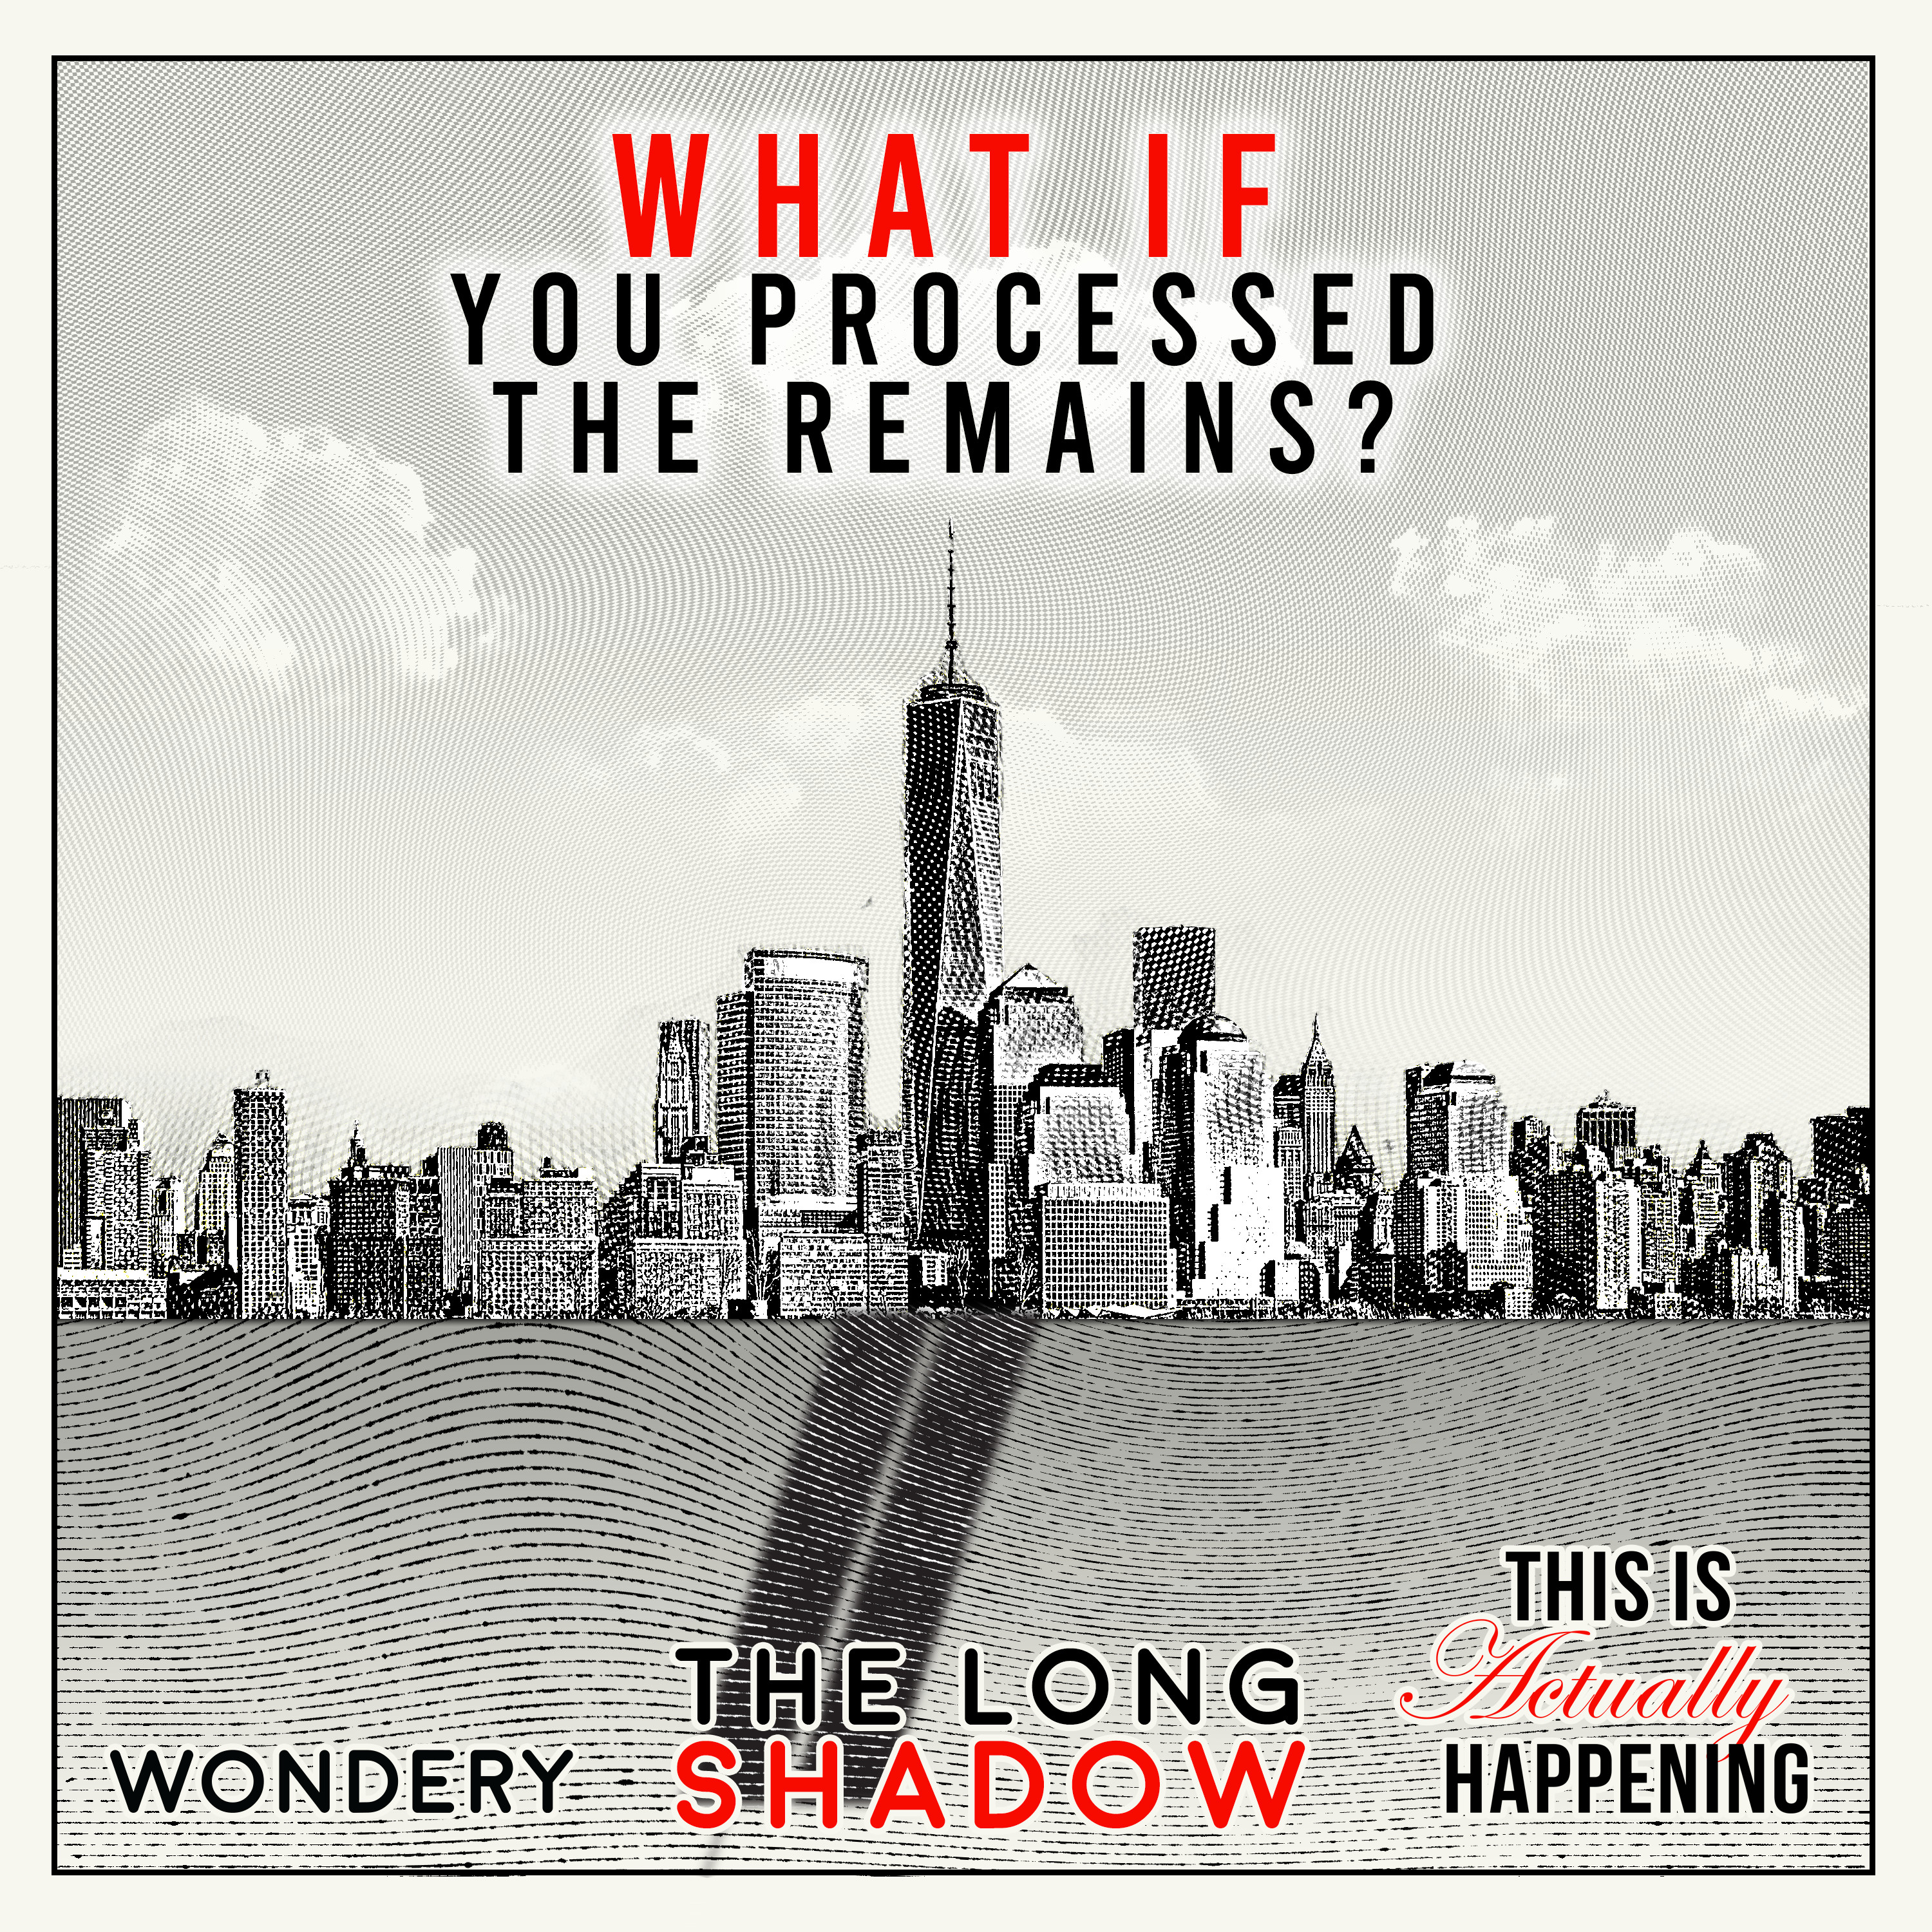 205: The Long Shadow: What if you processed the remains?